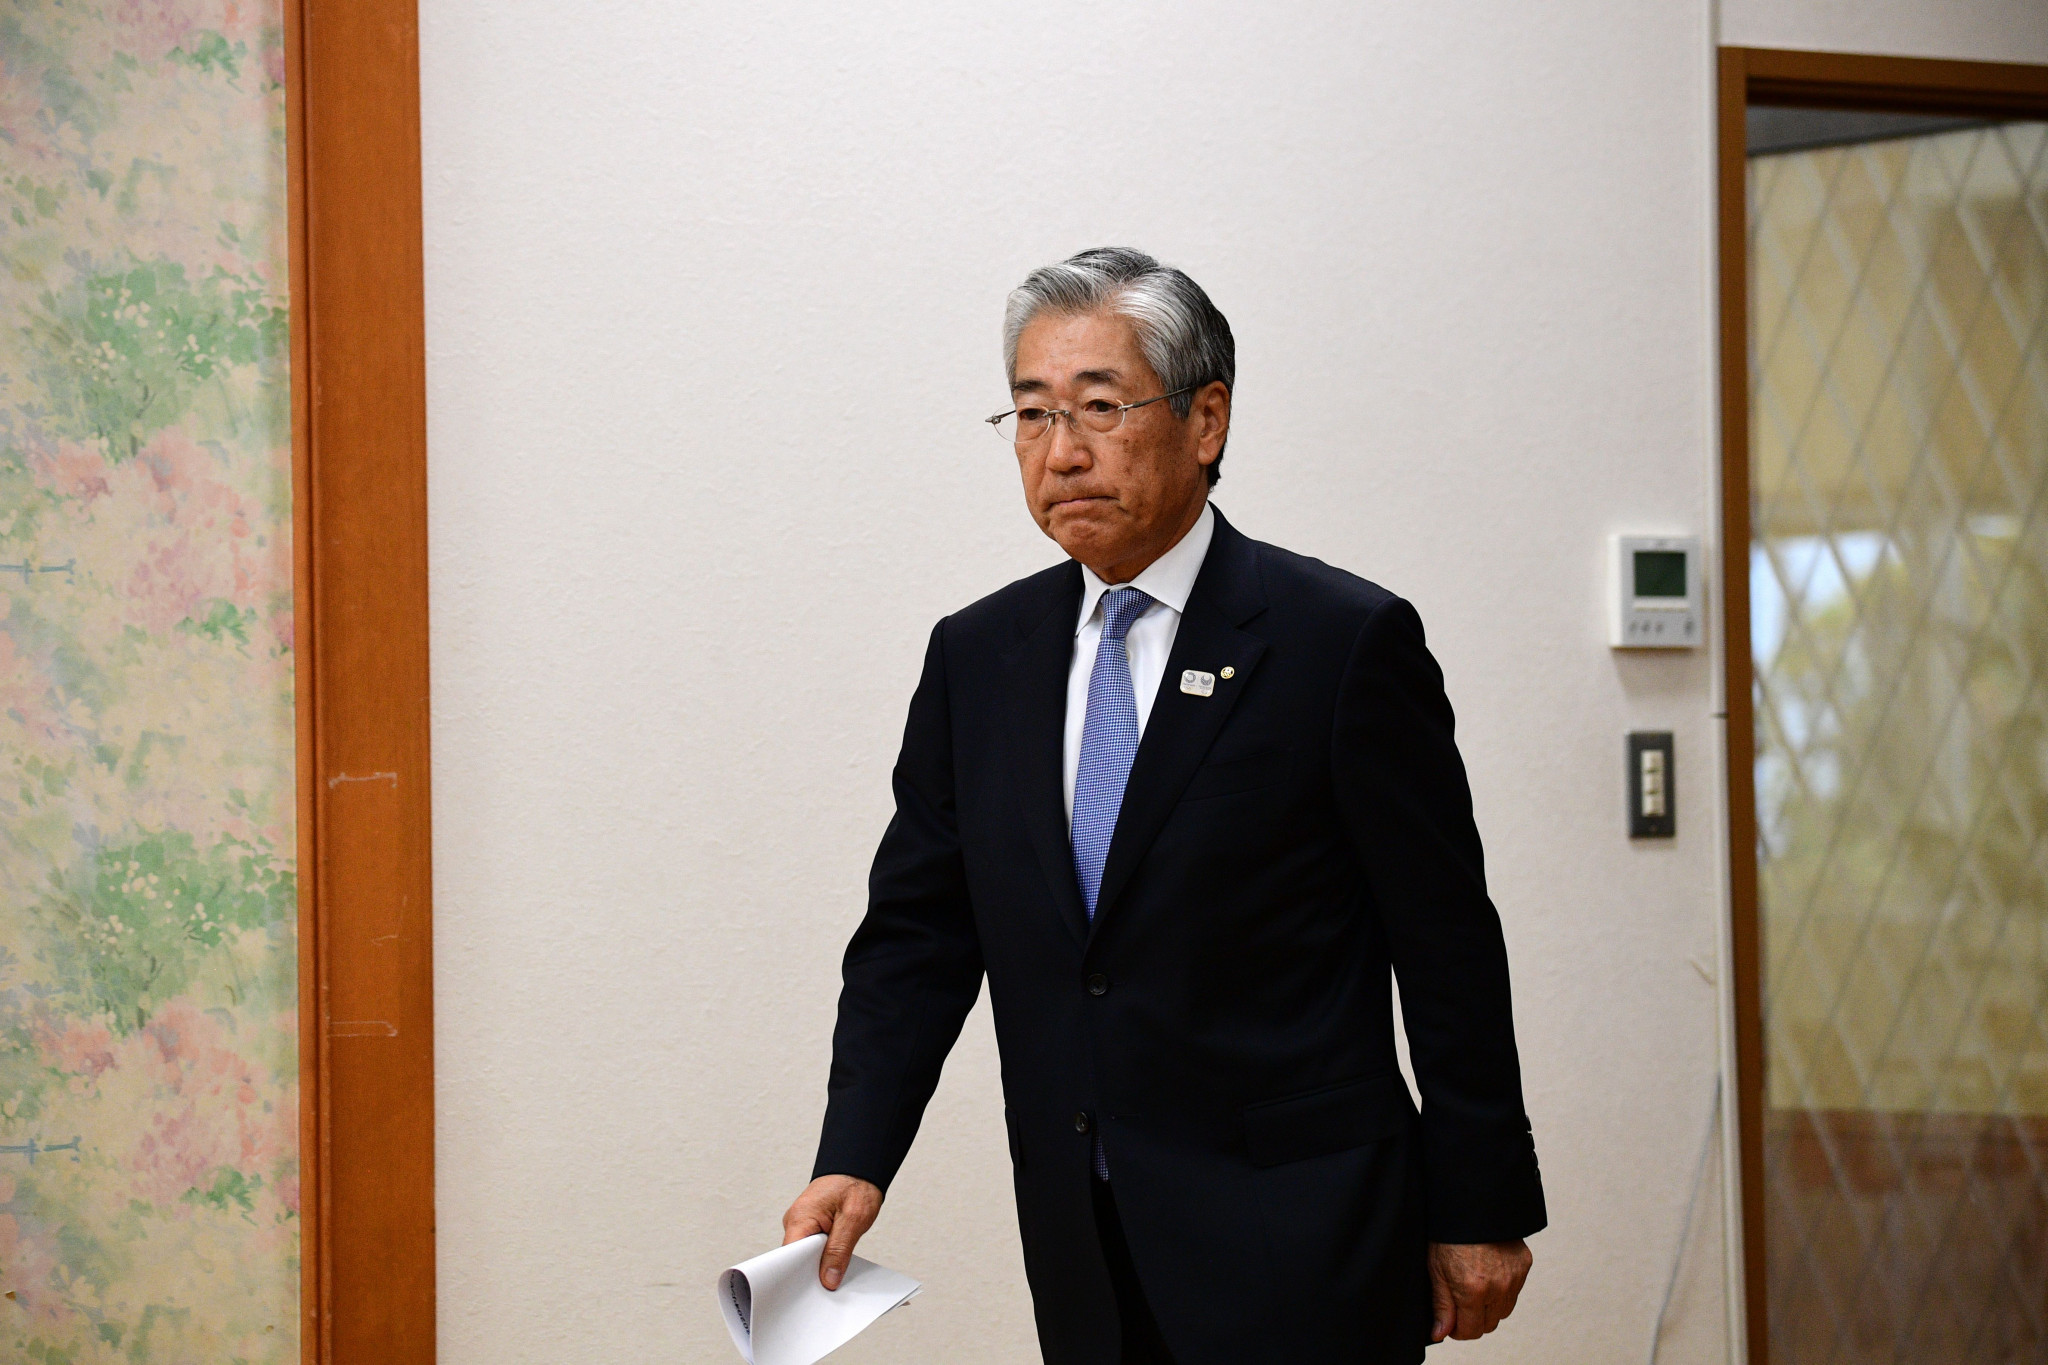 Takeda to miss IOC Marketing Commission meeting following corruption charge